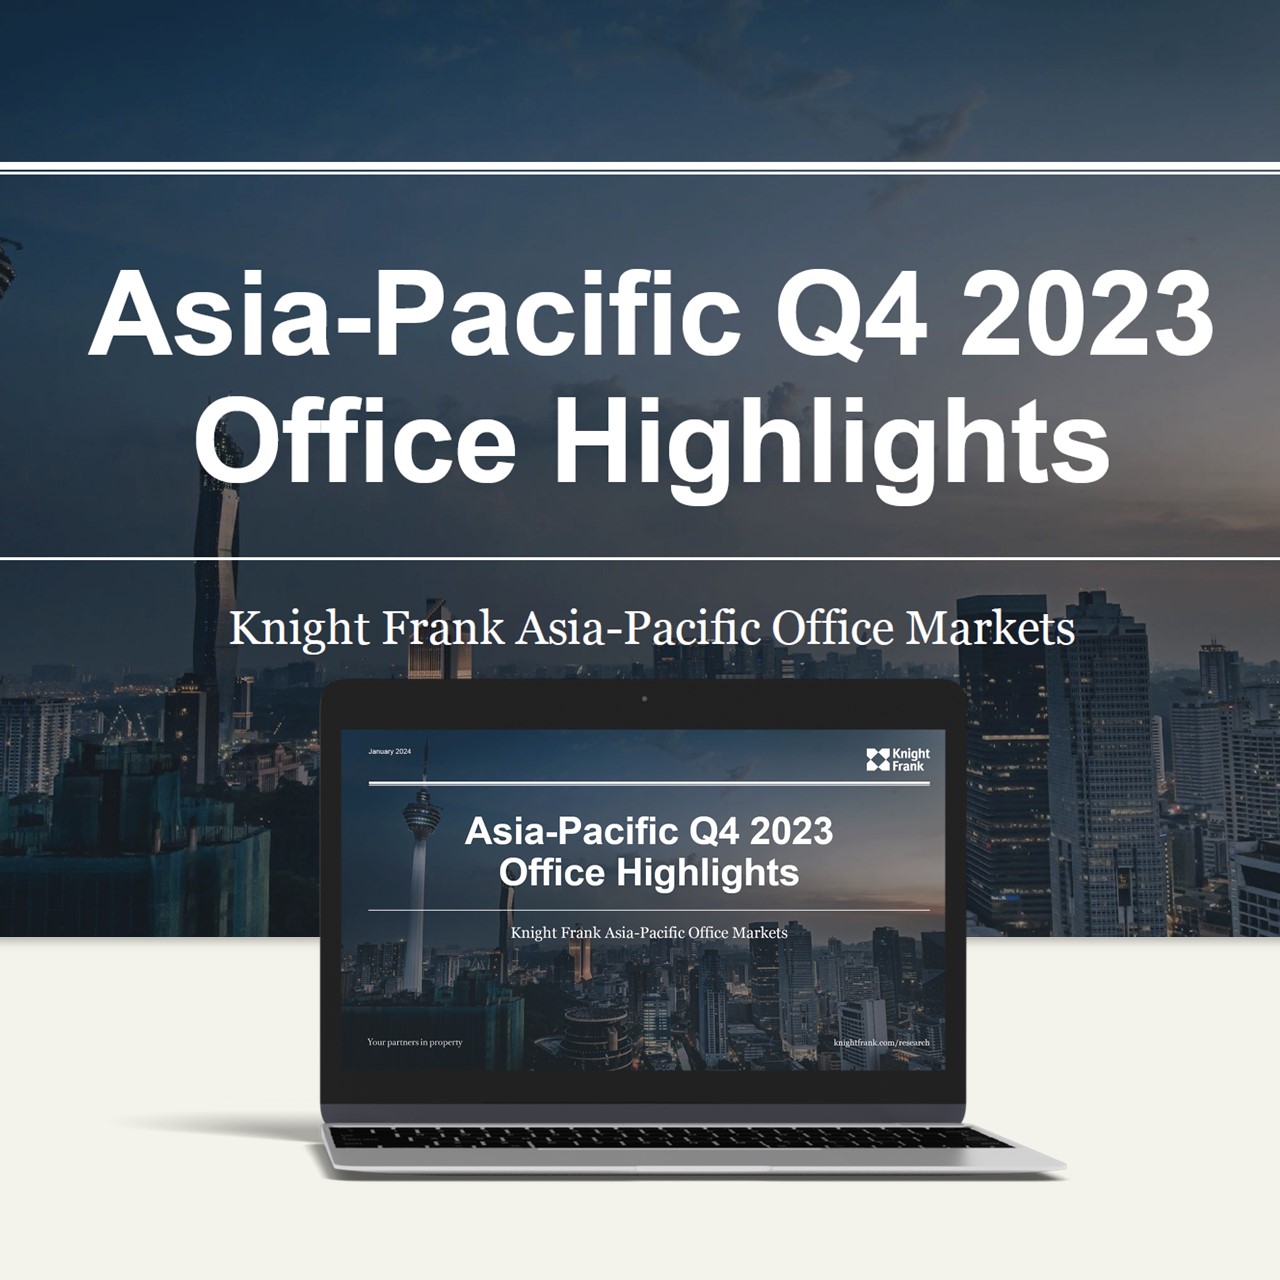 Knight Frank Asia-Pacific Q4 2023 Office Highlights